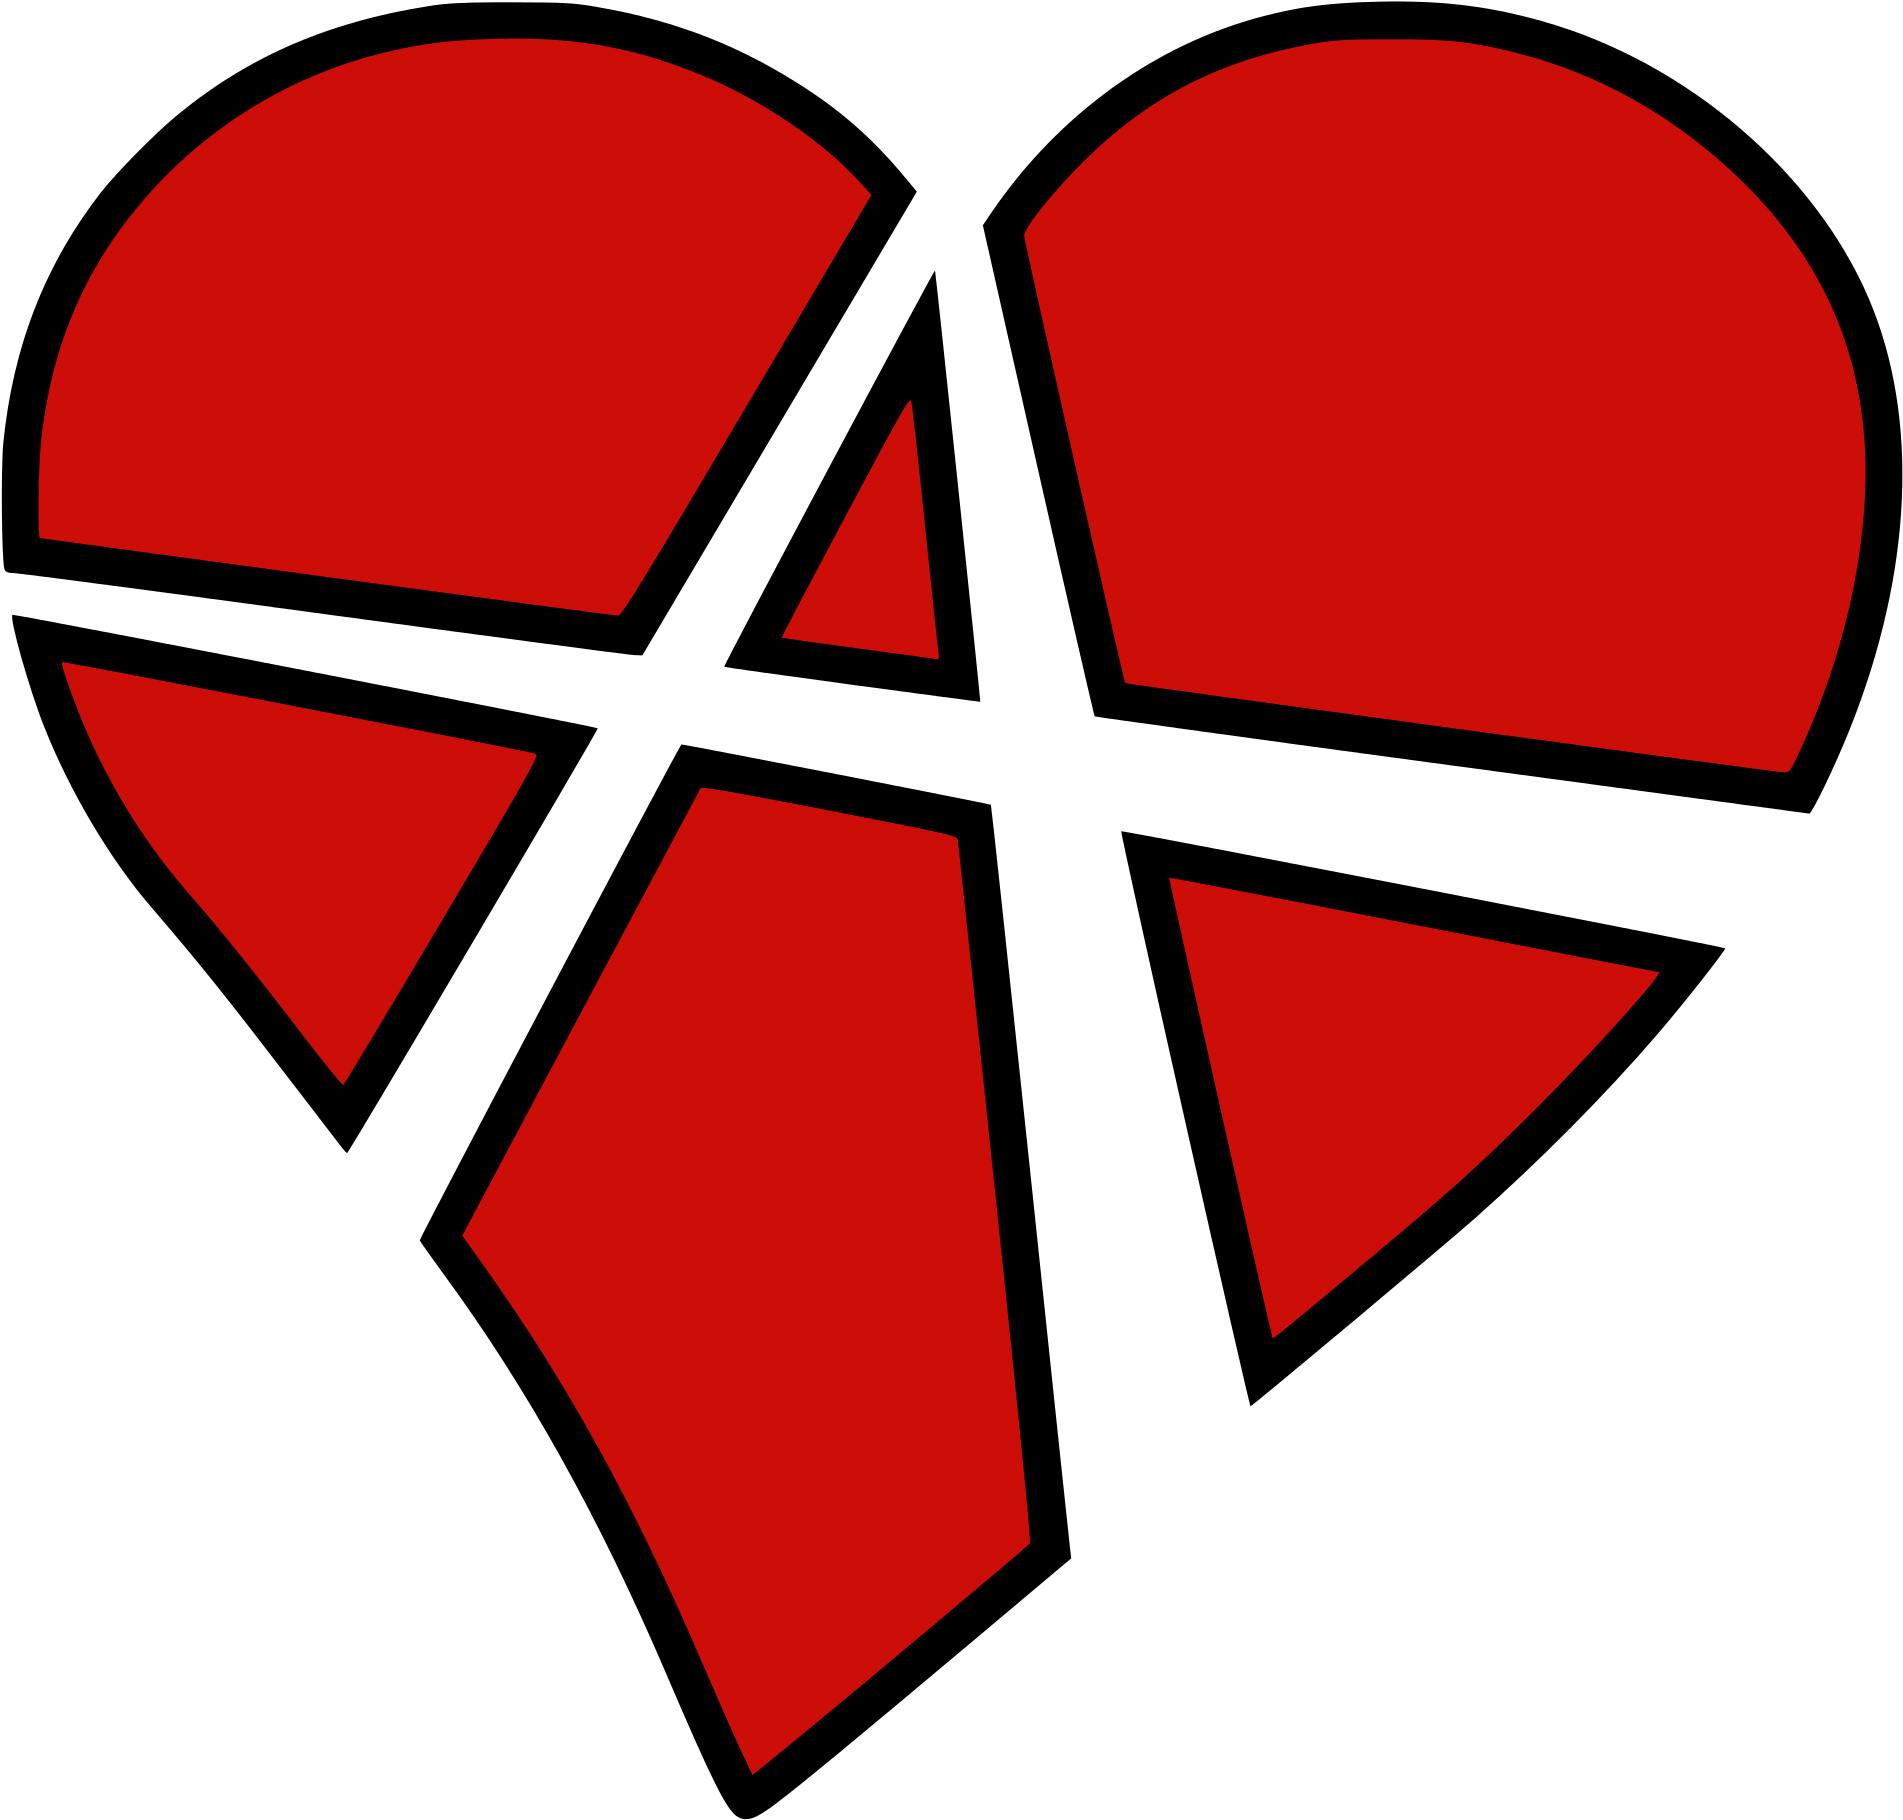 Anarchy Heart Symbol PNG image